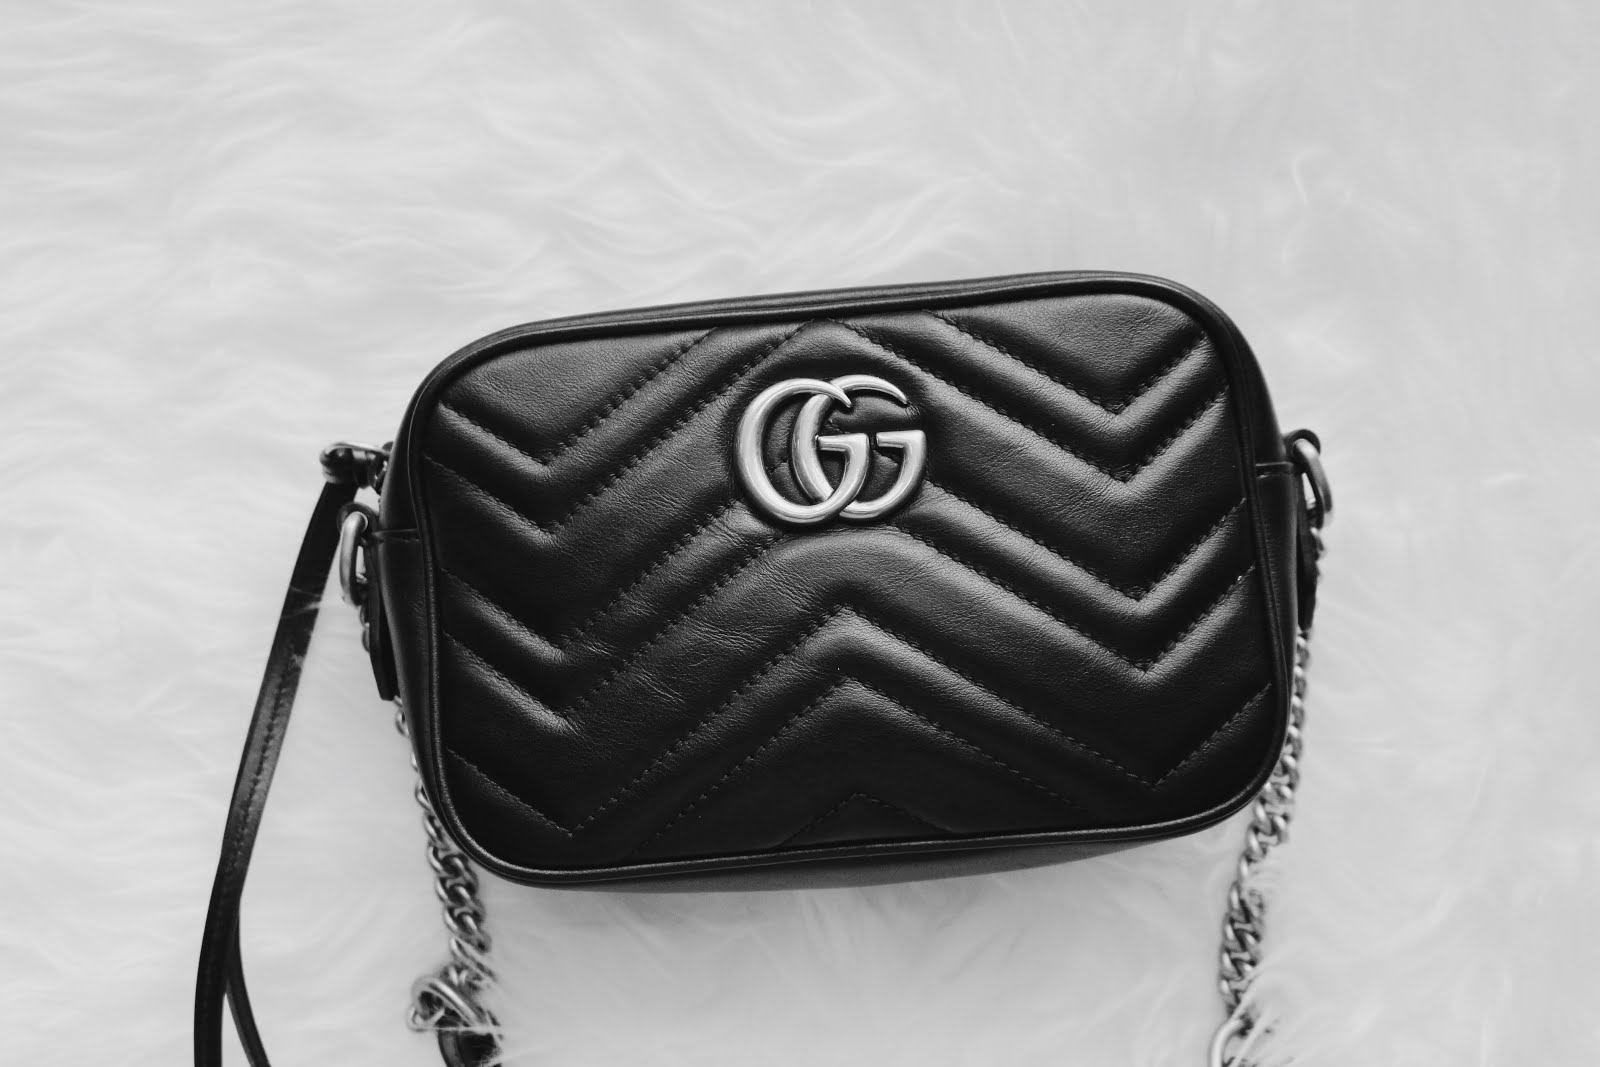 the Pink Sushi: What's In My Bag - GG Marmont Matelassé Mini Bag